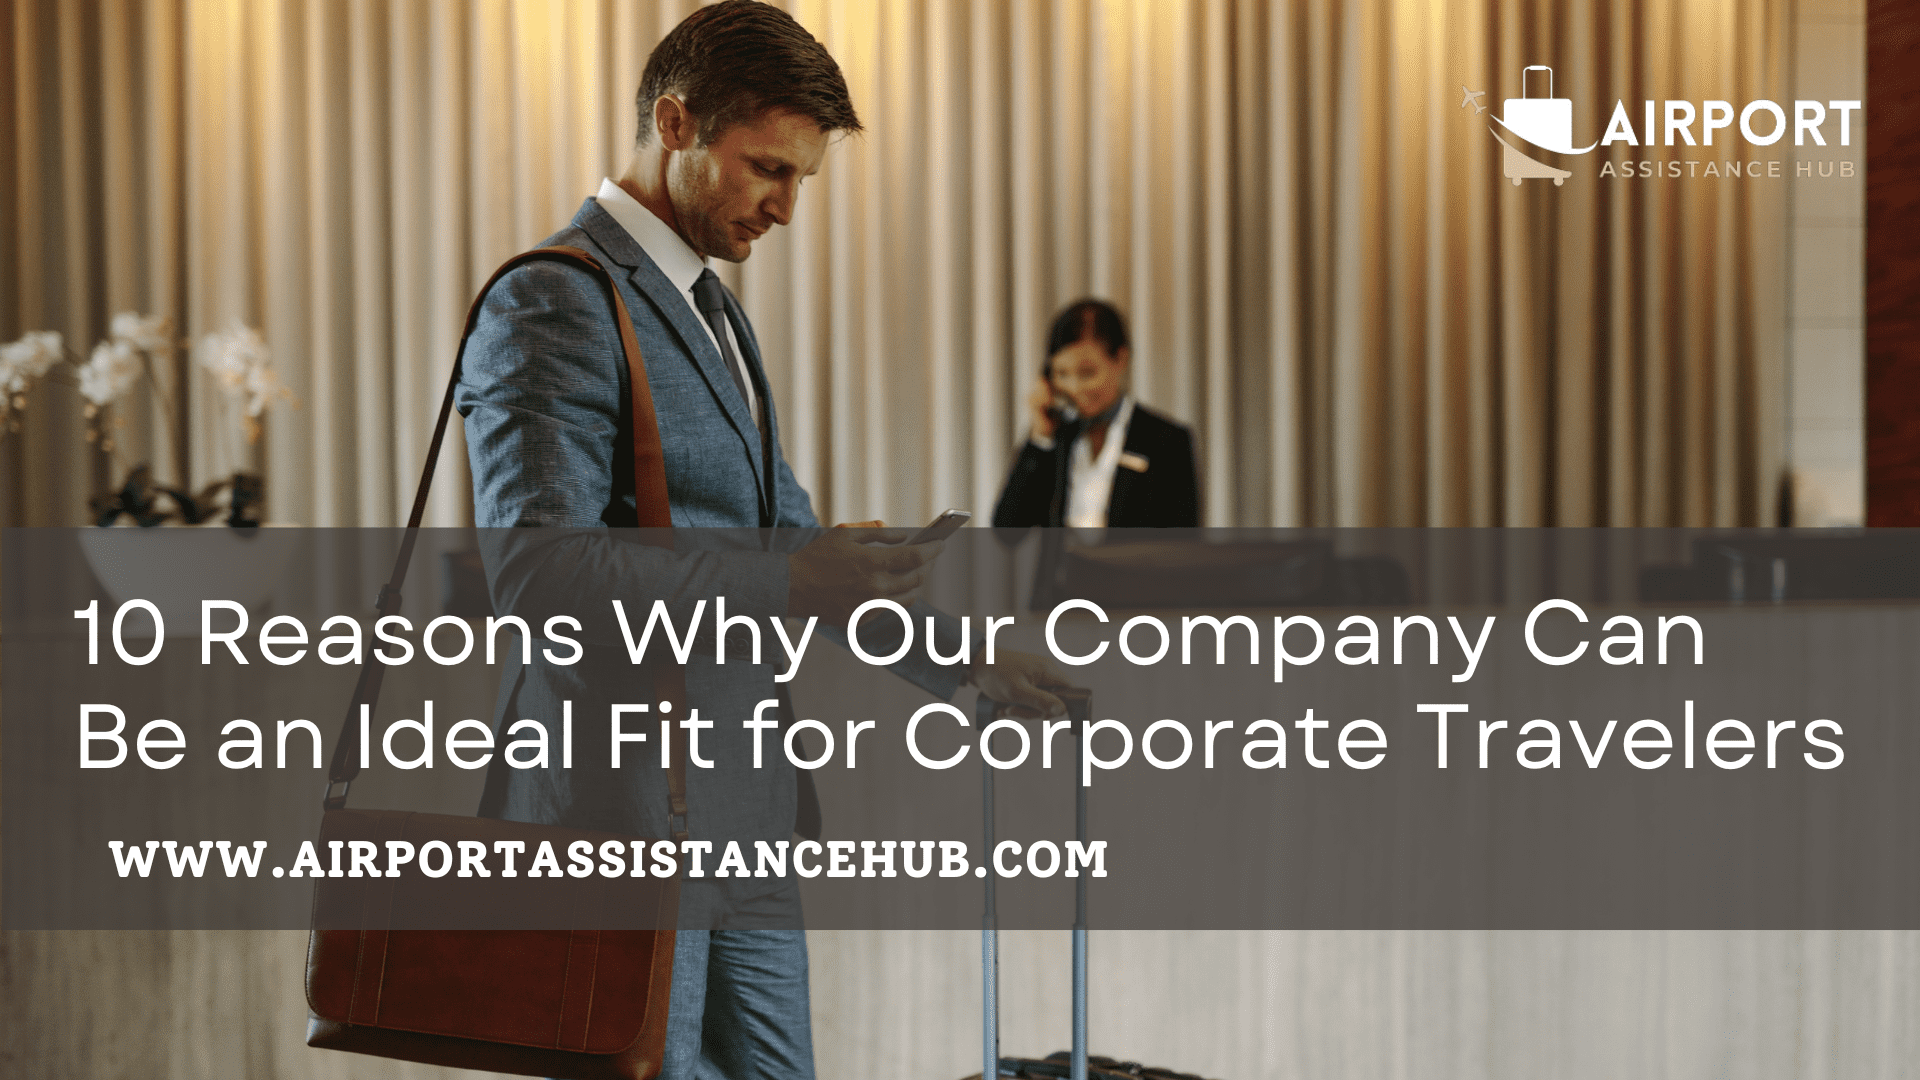 10 Reasons Why Our Company Can Be an Ideal Fit for Corporate Travelers